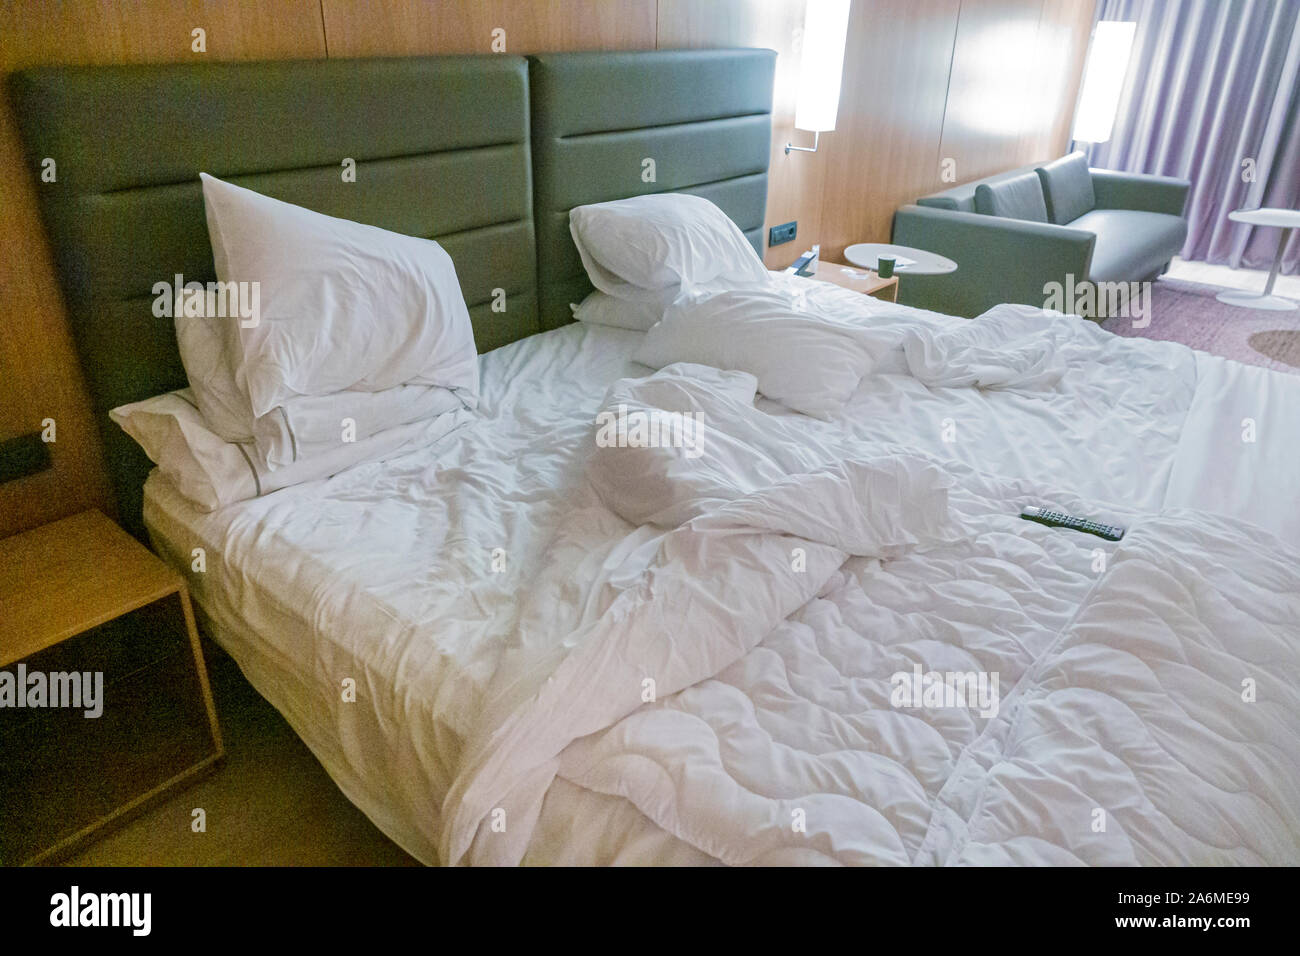 Barcelona Spain,Catalonia Les Corts,AC Hotel Diagonal L’Illa,hotel,guest room,king bed,unmade,crumpled messy bedding,down comforter,pillows,ES19090409 Stock Photo